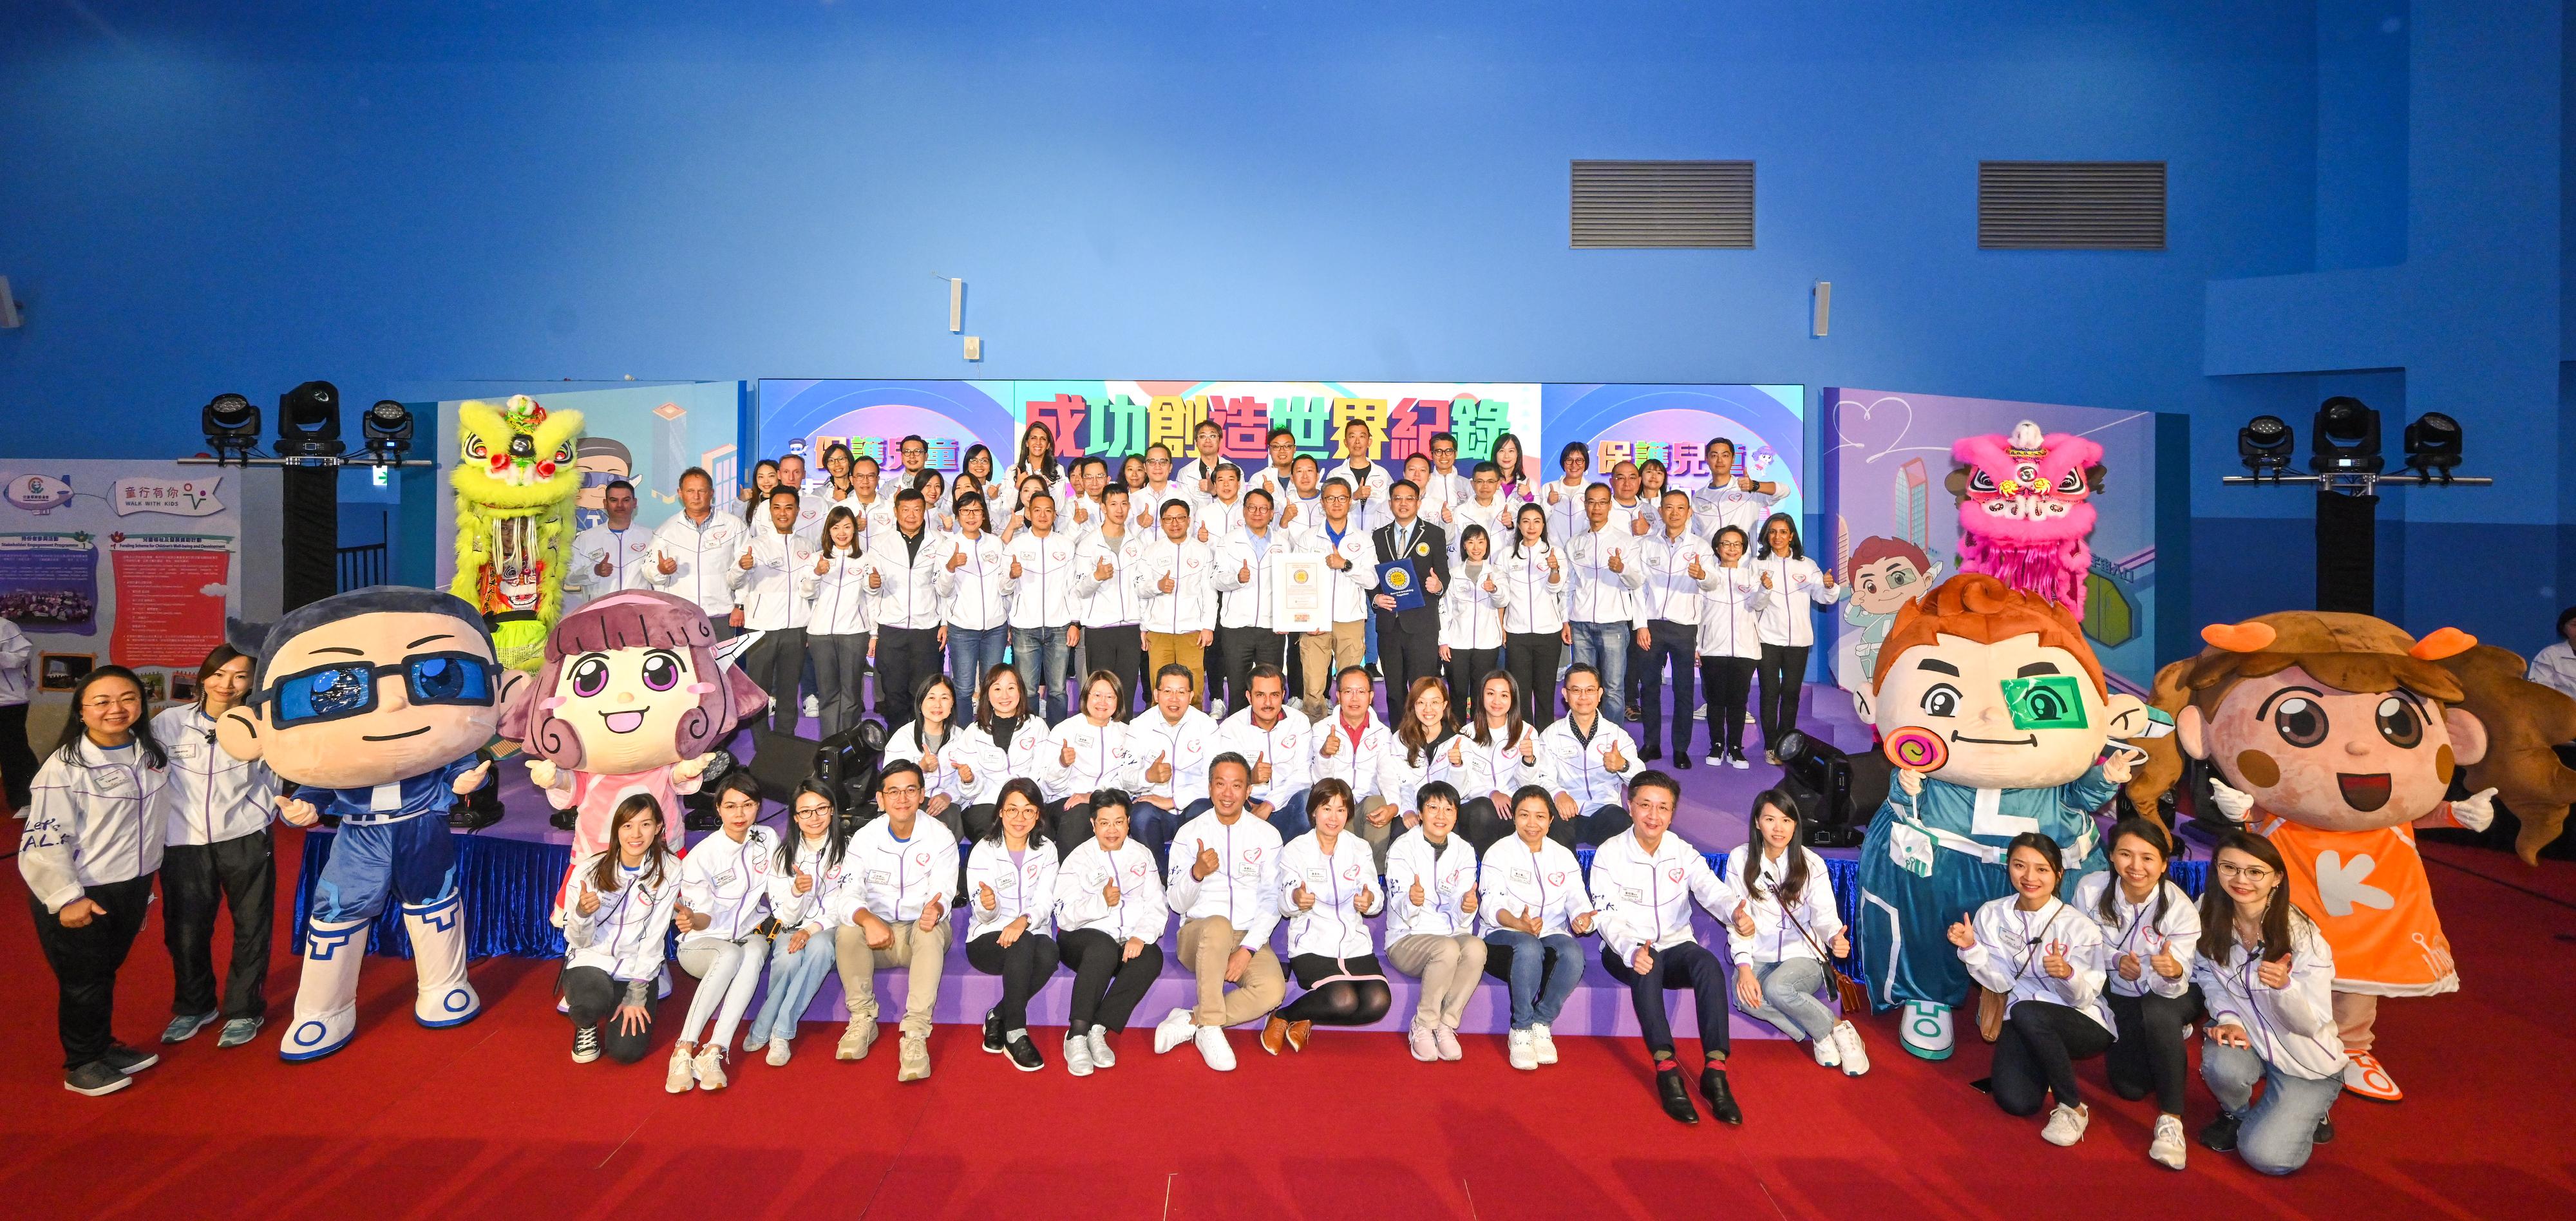 The Chief Secretary for Administration and Chairperson of the Commission on Children, Mr Chan Kwok-ki, today (November 18) officiated at the "Let's T.A.L.K. and Walk with Kids" Child Protection Campaign Award Presentation Ceremony 2023. Photo shows (standing on stage, first row, from sixth left) the Assistant Commissioner of Police (Crime), Ms Chung Wing-man; the Deputy Commissioner of Police (Operations), Mr Chow Yat-ming; Ambassador of the Child Protection Campaign Mr So Wa-wai; the Secretary for Labour and Welfare, Mr Chris Sun; Mr Chan; the Commissioner of Police, Mr Siu Chak-yee; the adjudicator representative of world records; the Director of Social Welfare, Miss Charmaine Lee; Ambassador of the Child Protection Campaign Ms Guo Jingjing; the Director of Crime and Security of Police, Mr Yip Wan-lung; the Consultant Community Medicine (Family and Student Health) of the Department of Health, Dr Thomas Chung; members of the Commission on Children; Regional Commanders of the Police; and representatives of sponsors and supporting organisations of the Campaign.